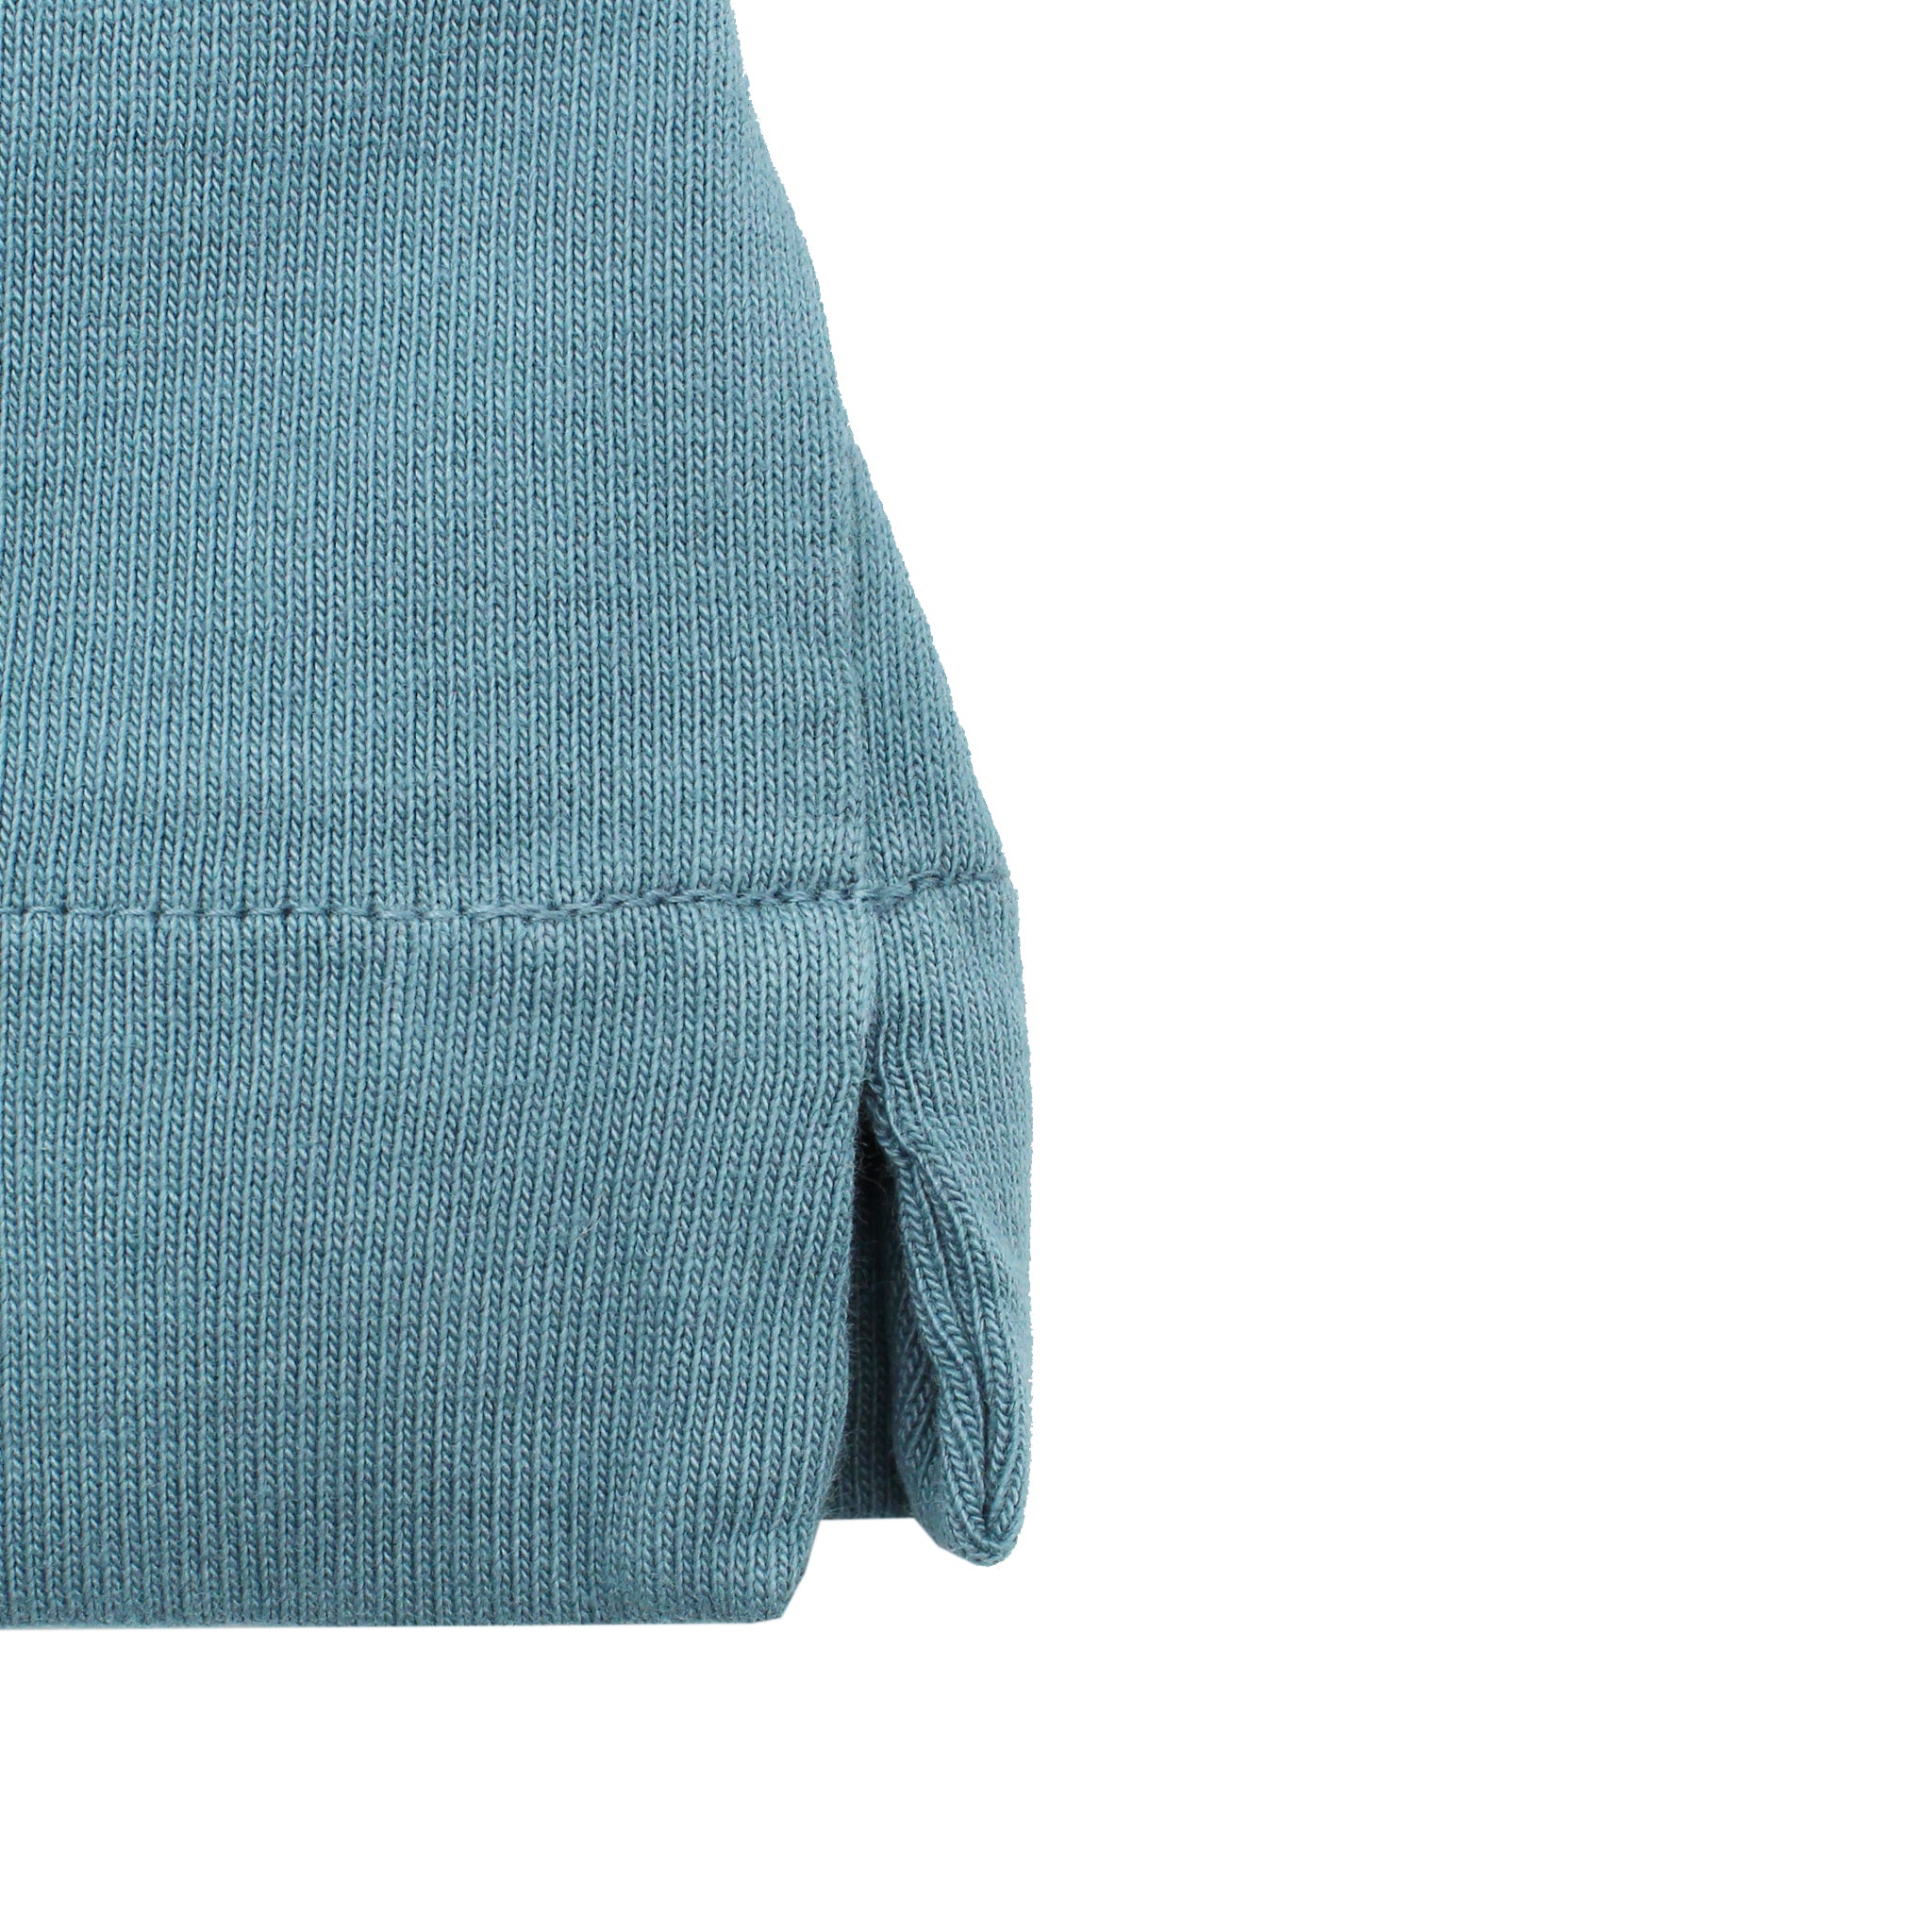 Turquoise garment dyed cotton T-shirt with Finamore 1925 logo